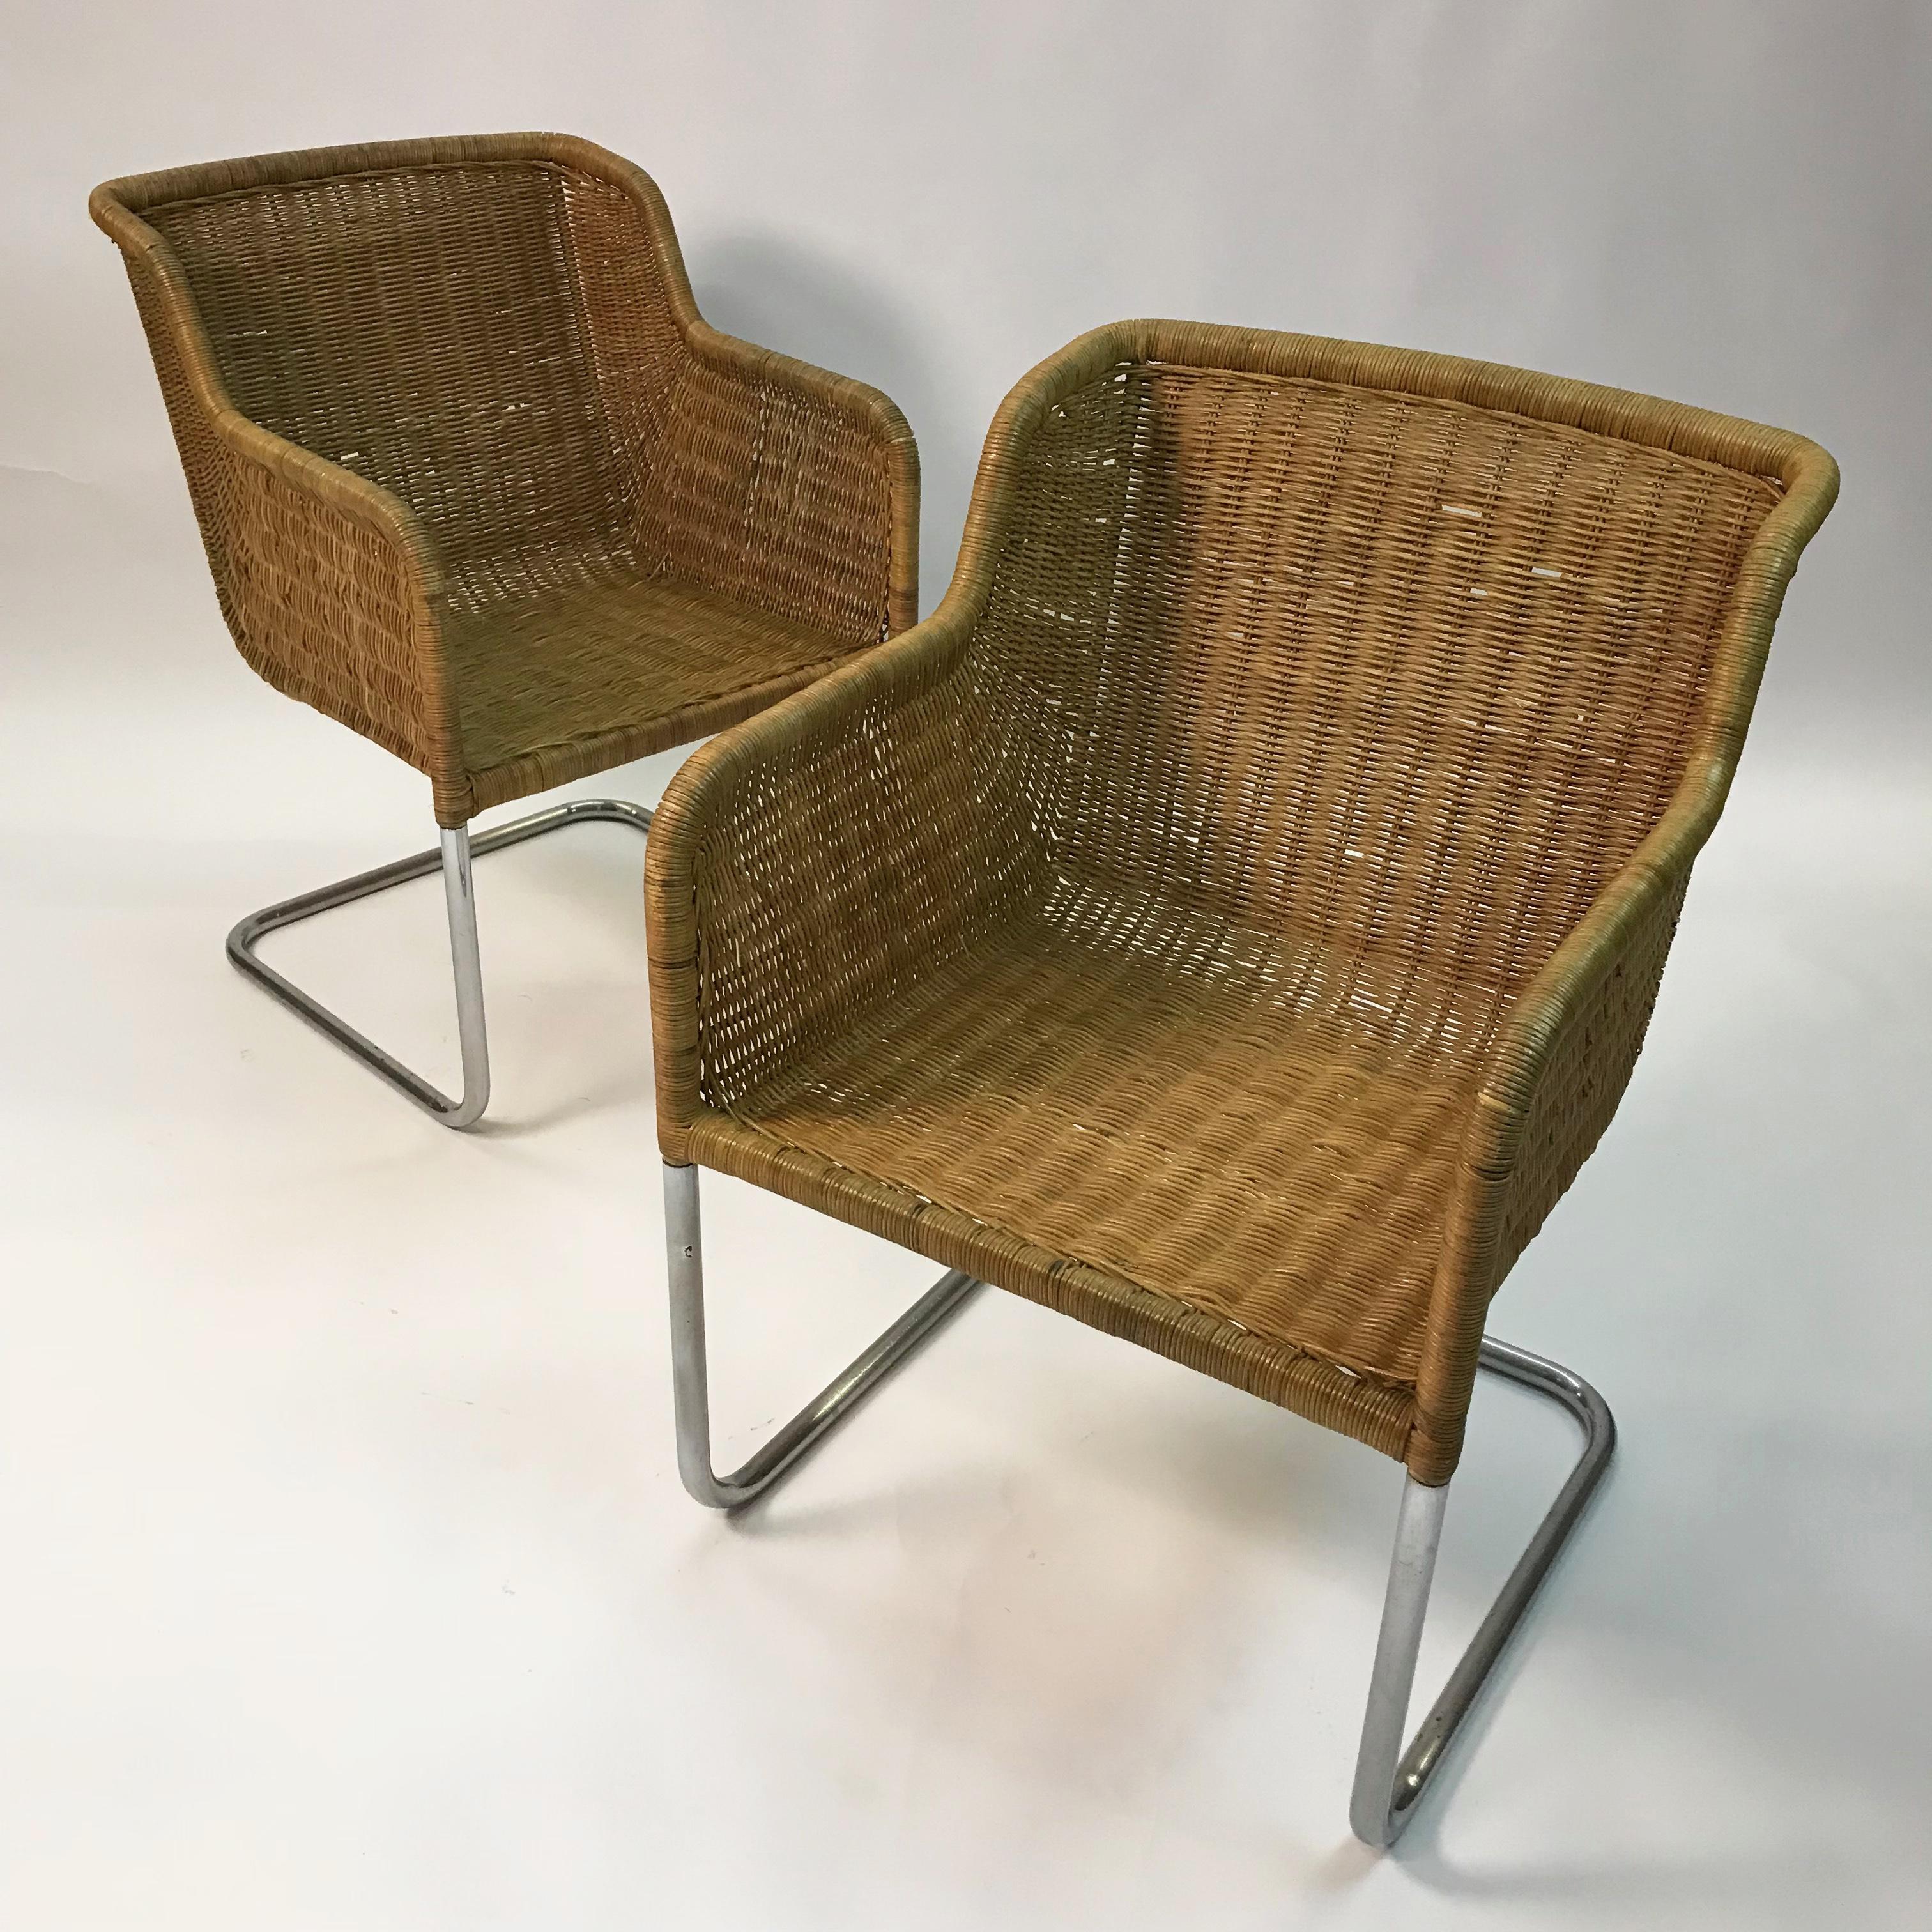 Mid-Century Modern, armchairs in the style of Harvey Probber feature deep, bucket, rattan wicker seats with cantilever, chrome bases. Measures: Arm height is 27 inches and seat depth is 18 inches. Listed price is for the pair.